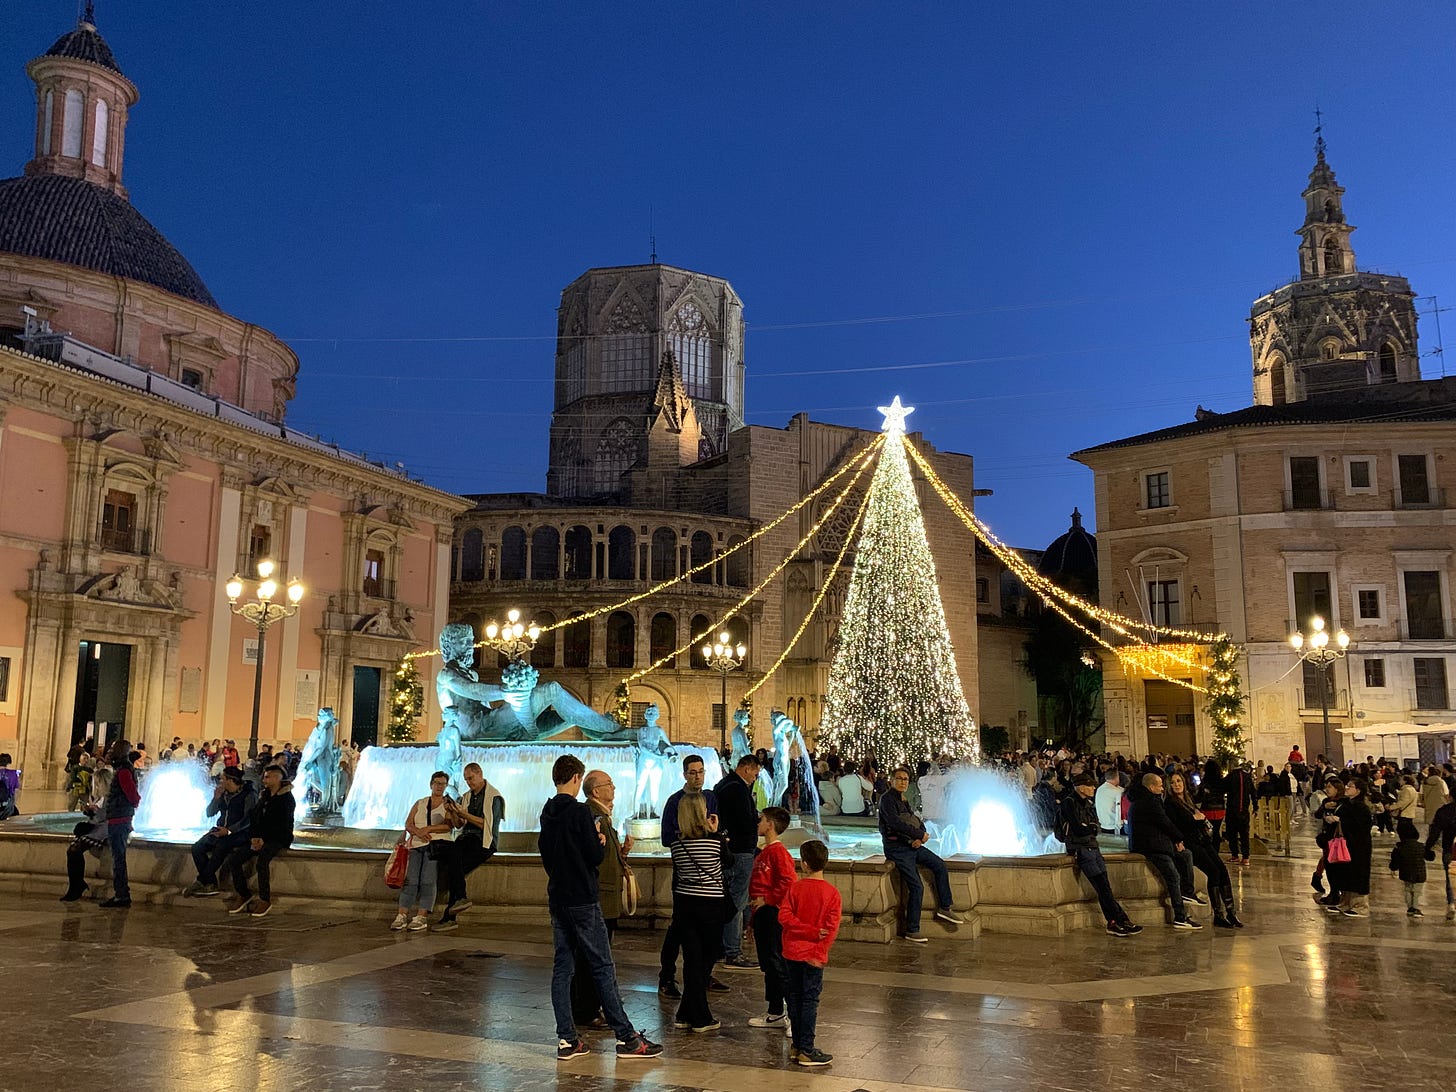 Another view of the Plaza de Virgin with the fountain in front of the Christmas tree, with the Basilica and the cathedral behind it.